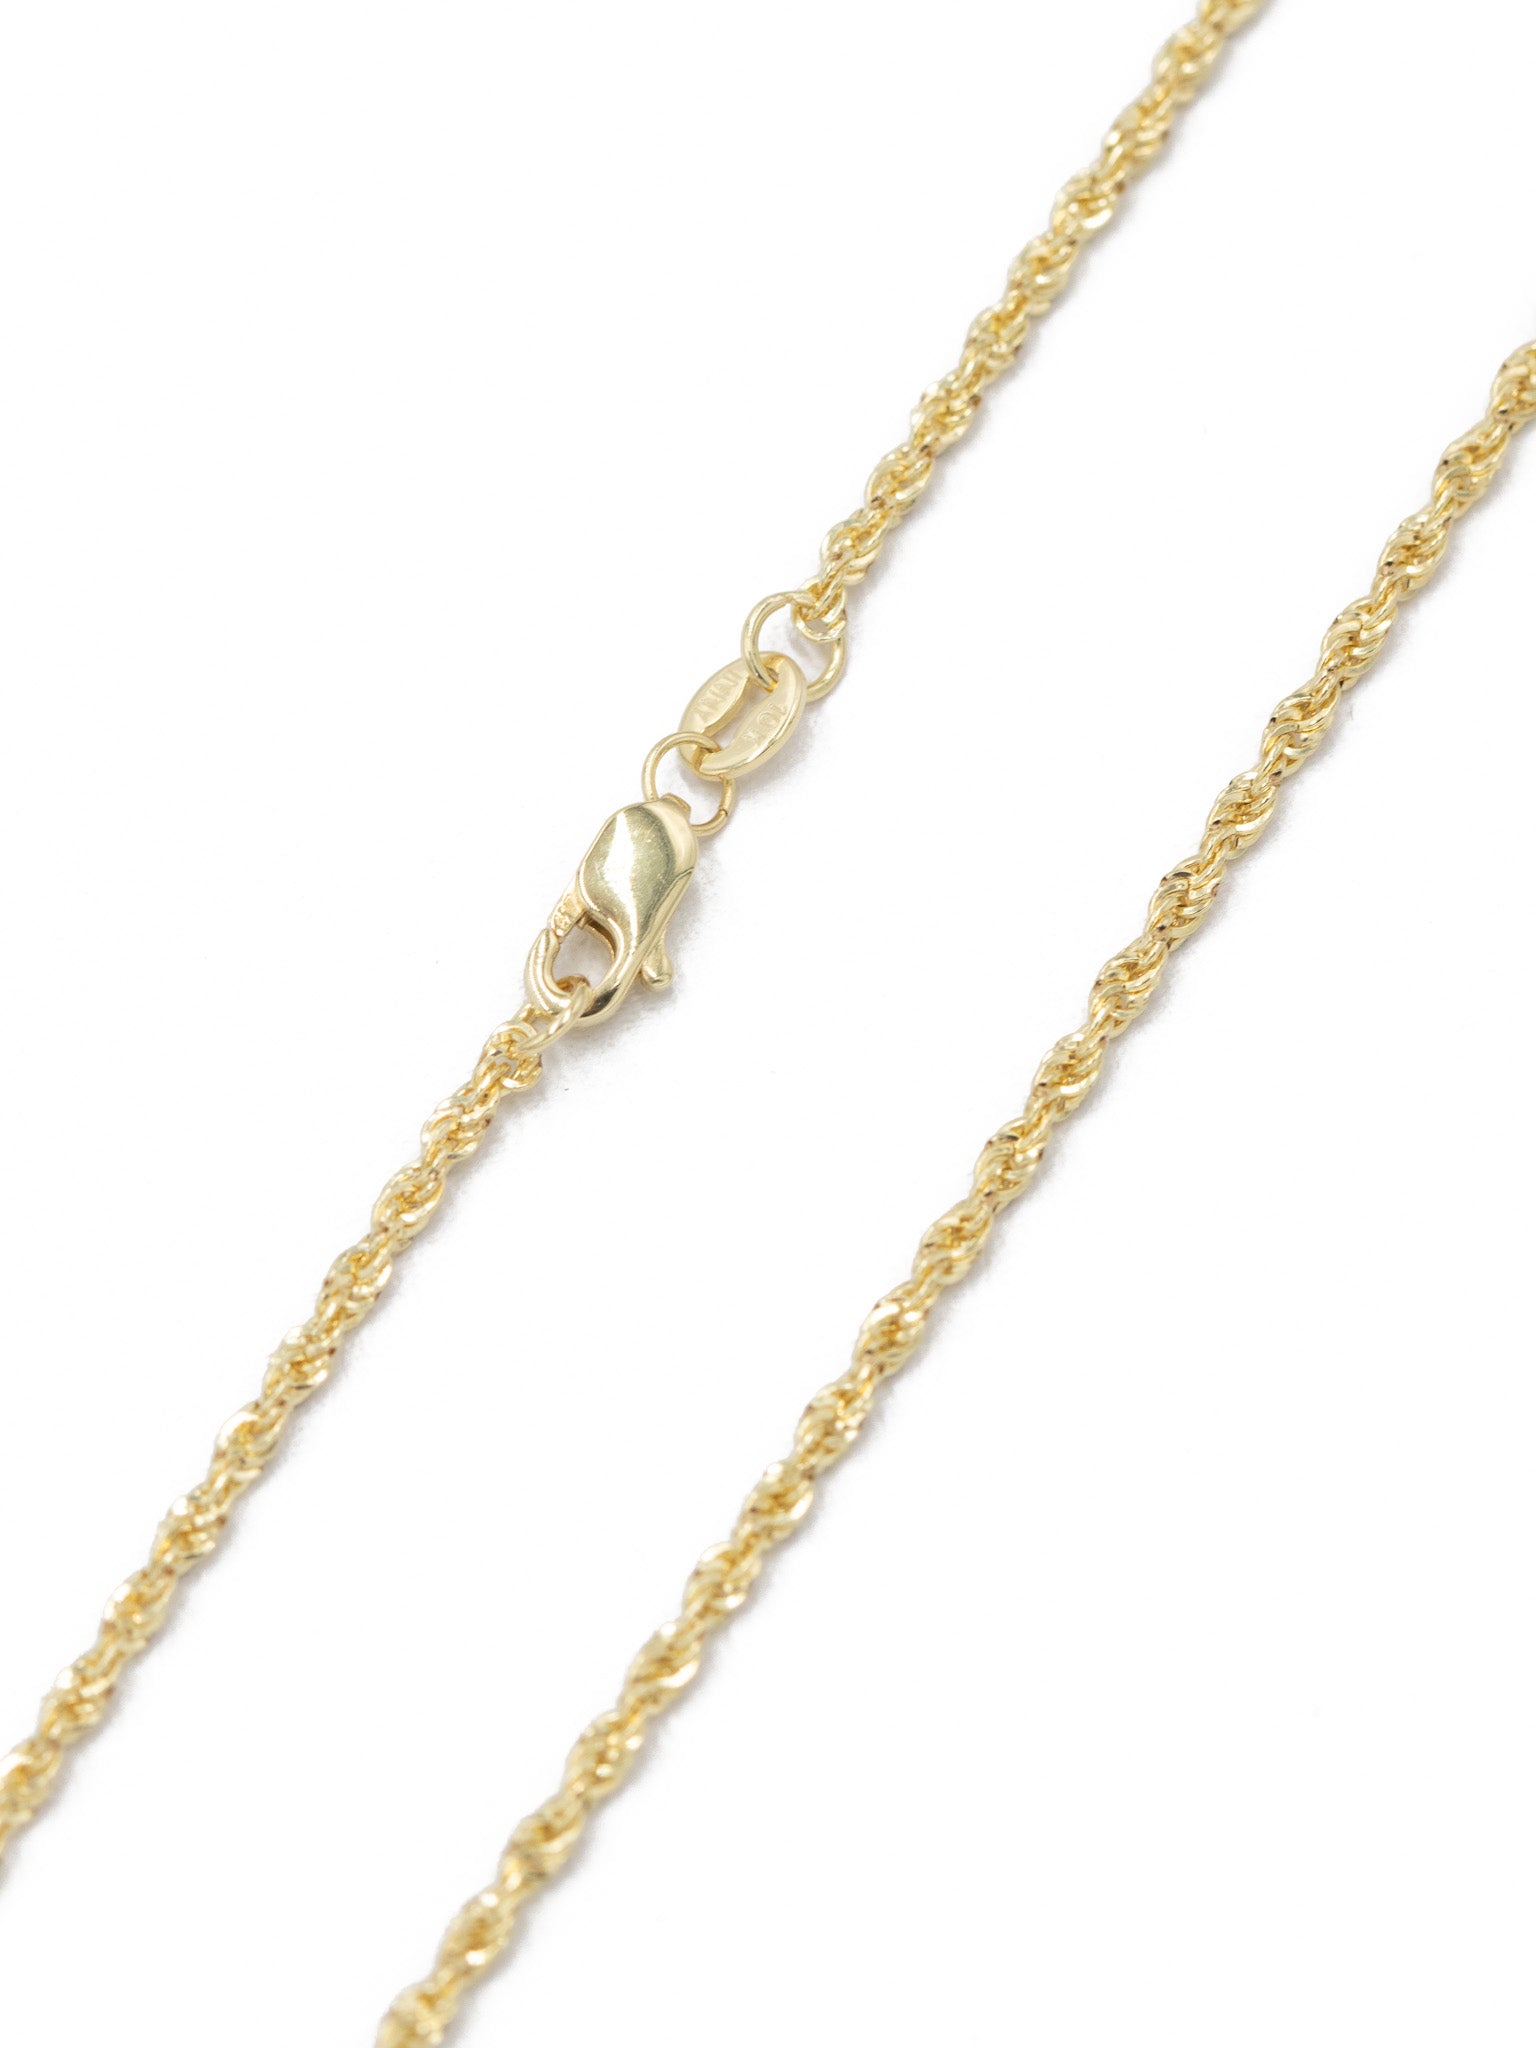 10K Gold 1.6mm Rope Chain